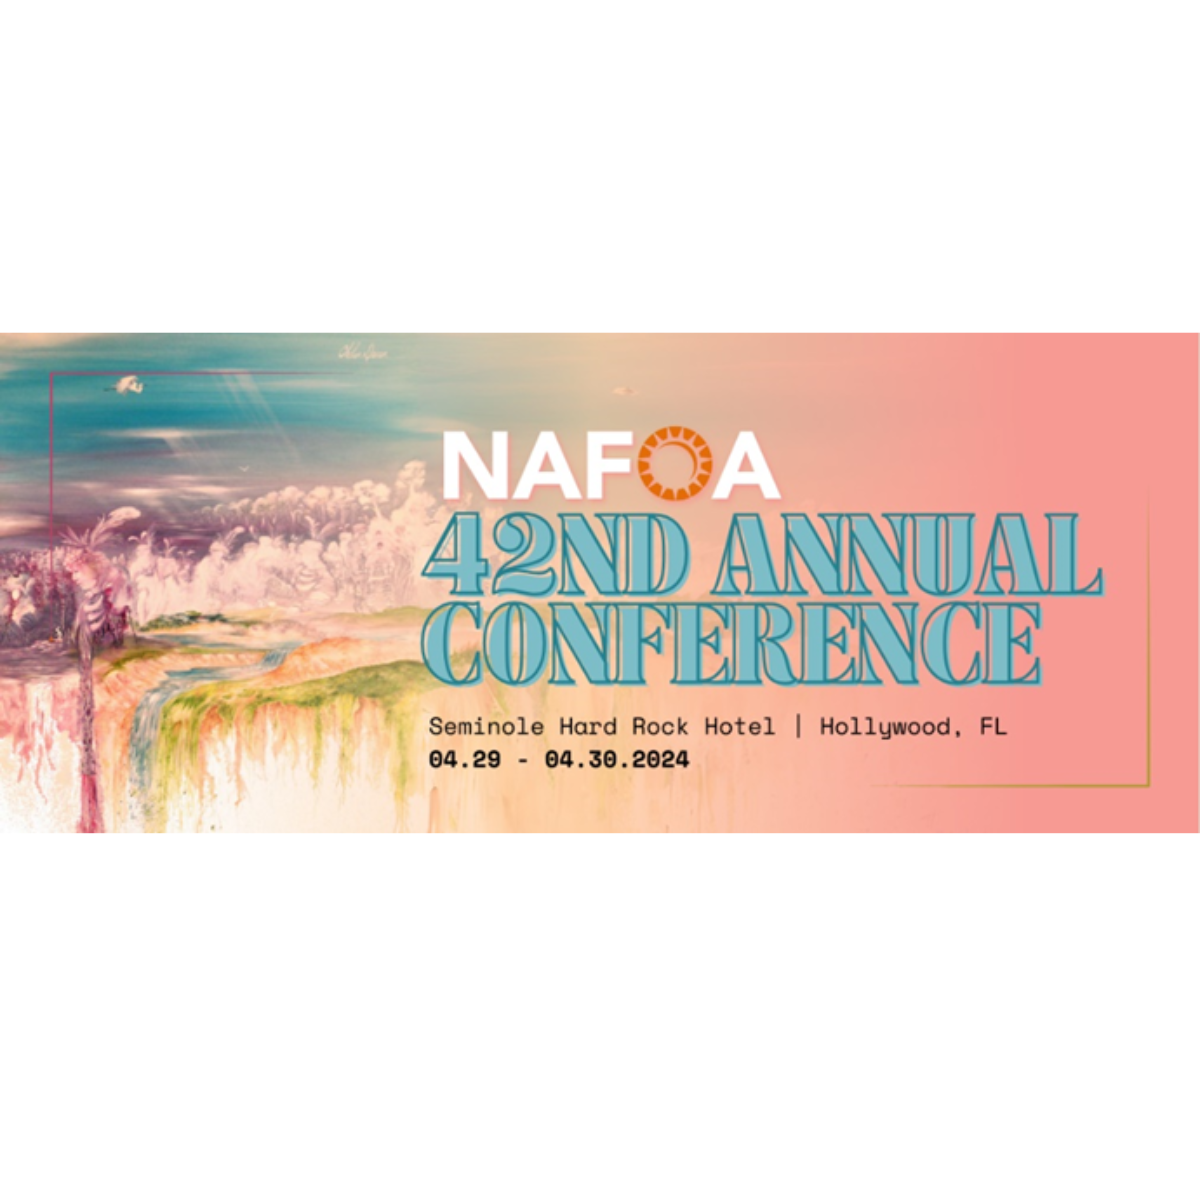 NAFOA 42nd Annual Conference Image-1